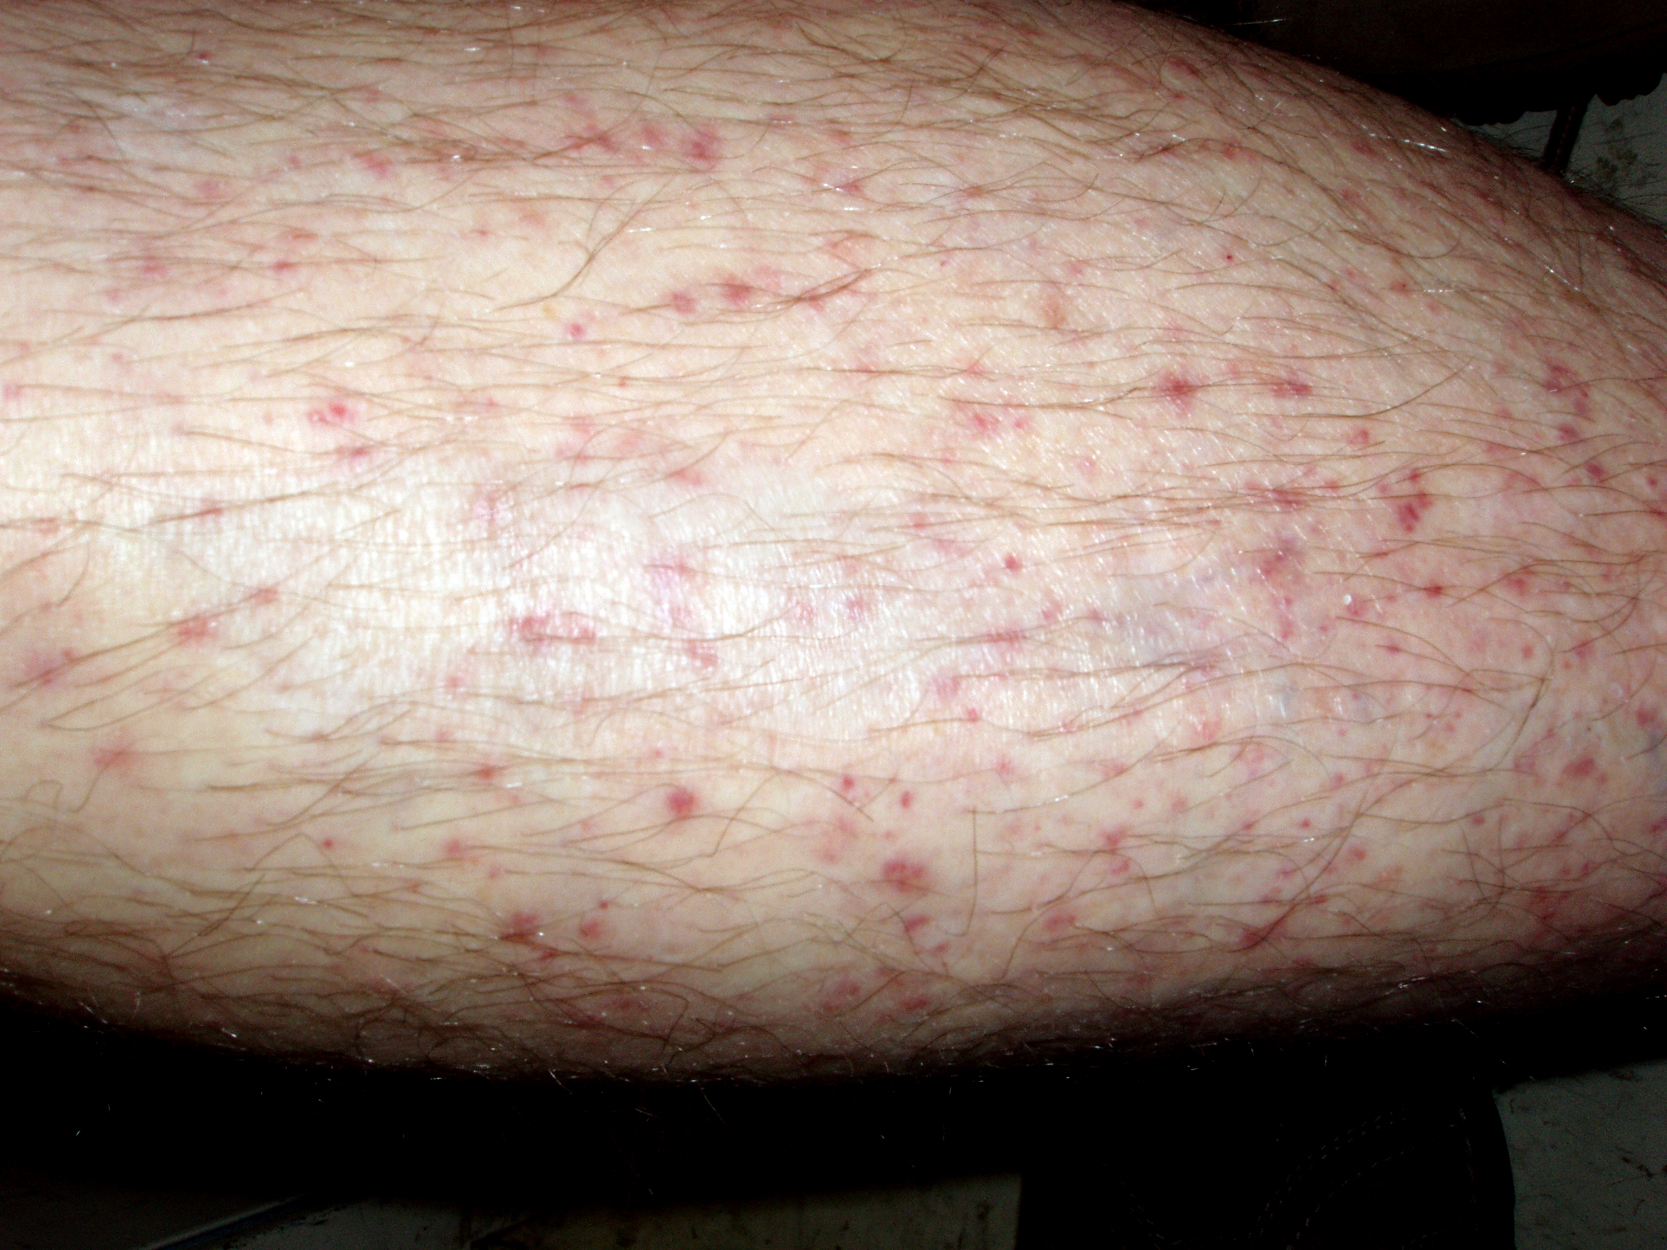 Red Spots On Legs Pictures Symptoms Causes Treatment Diseases Images